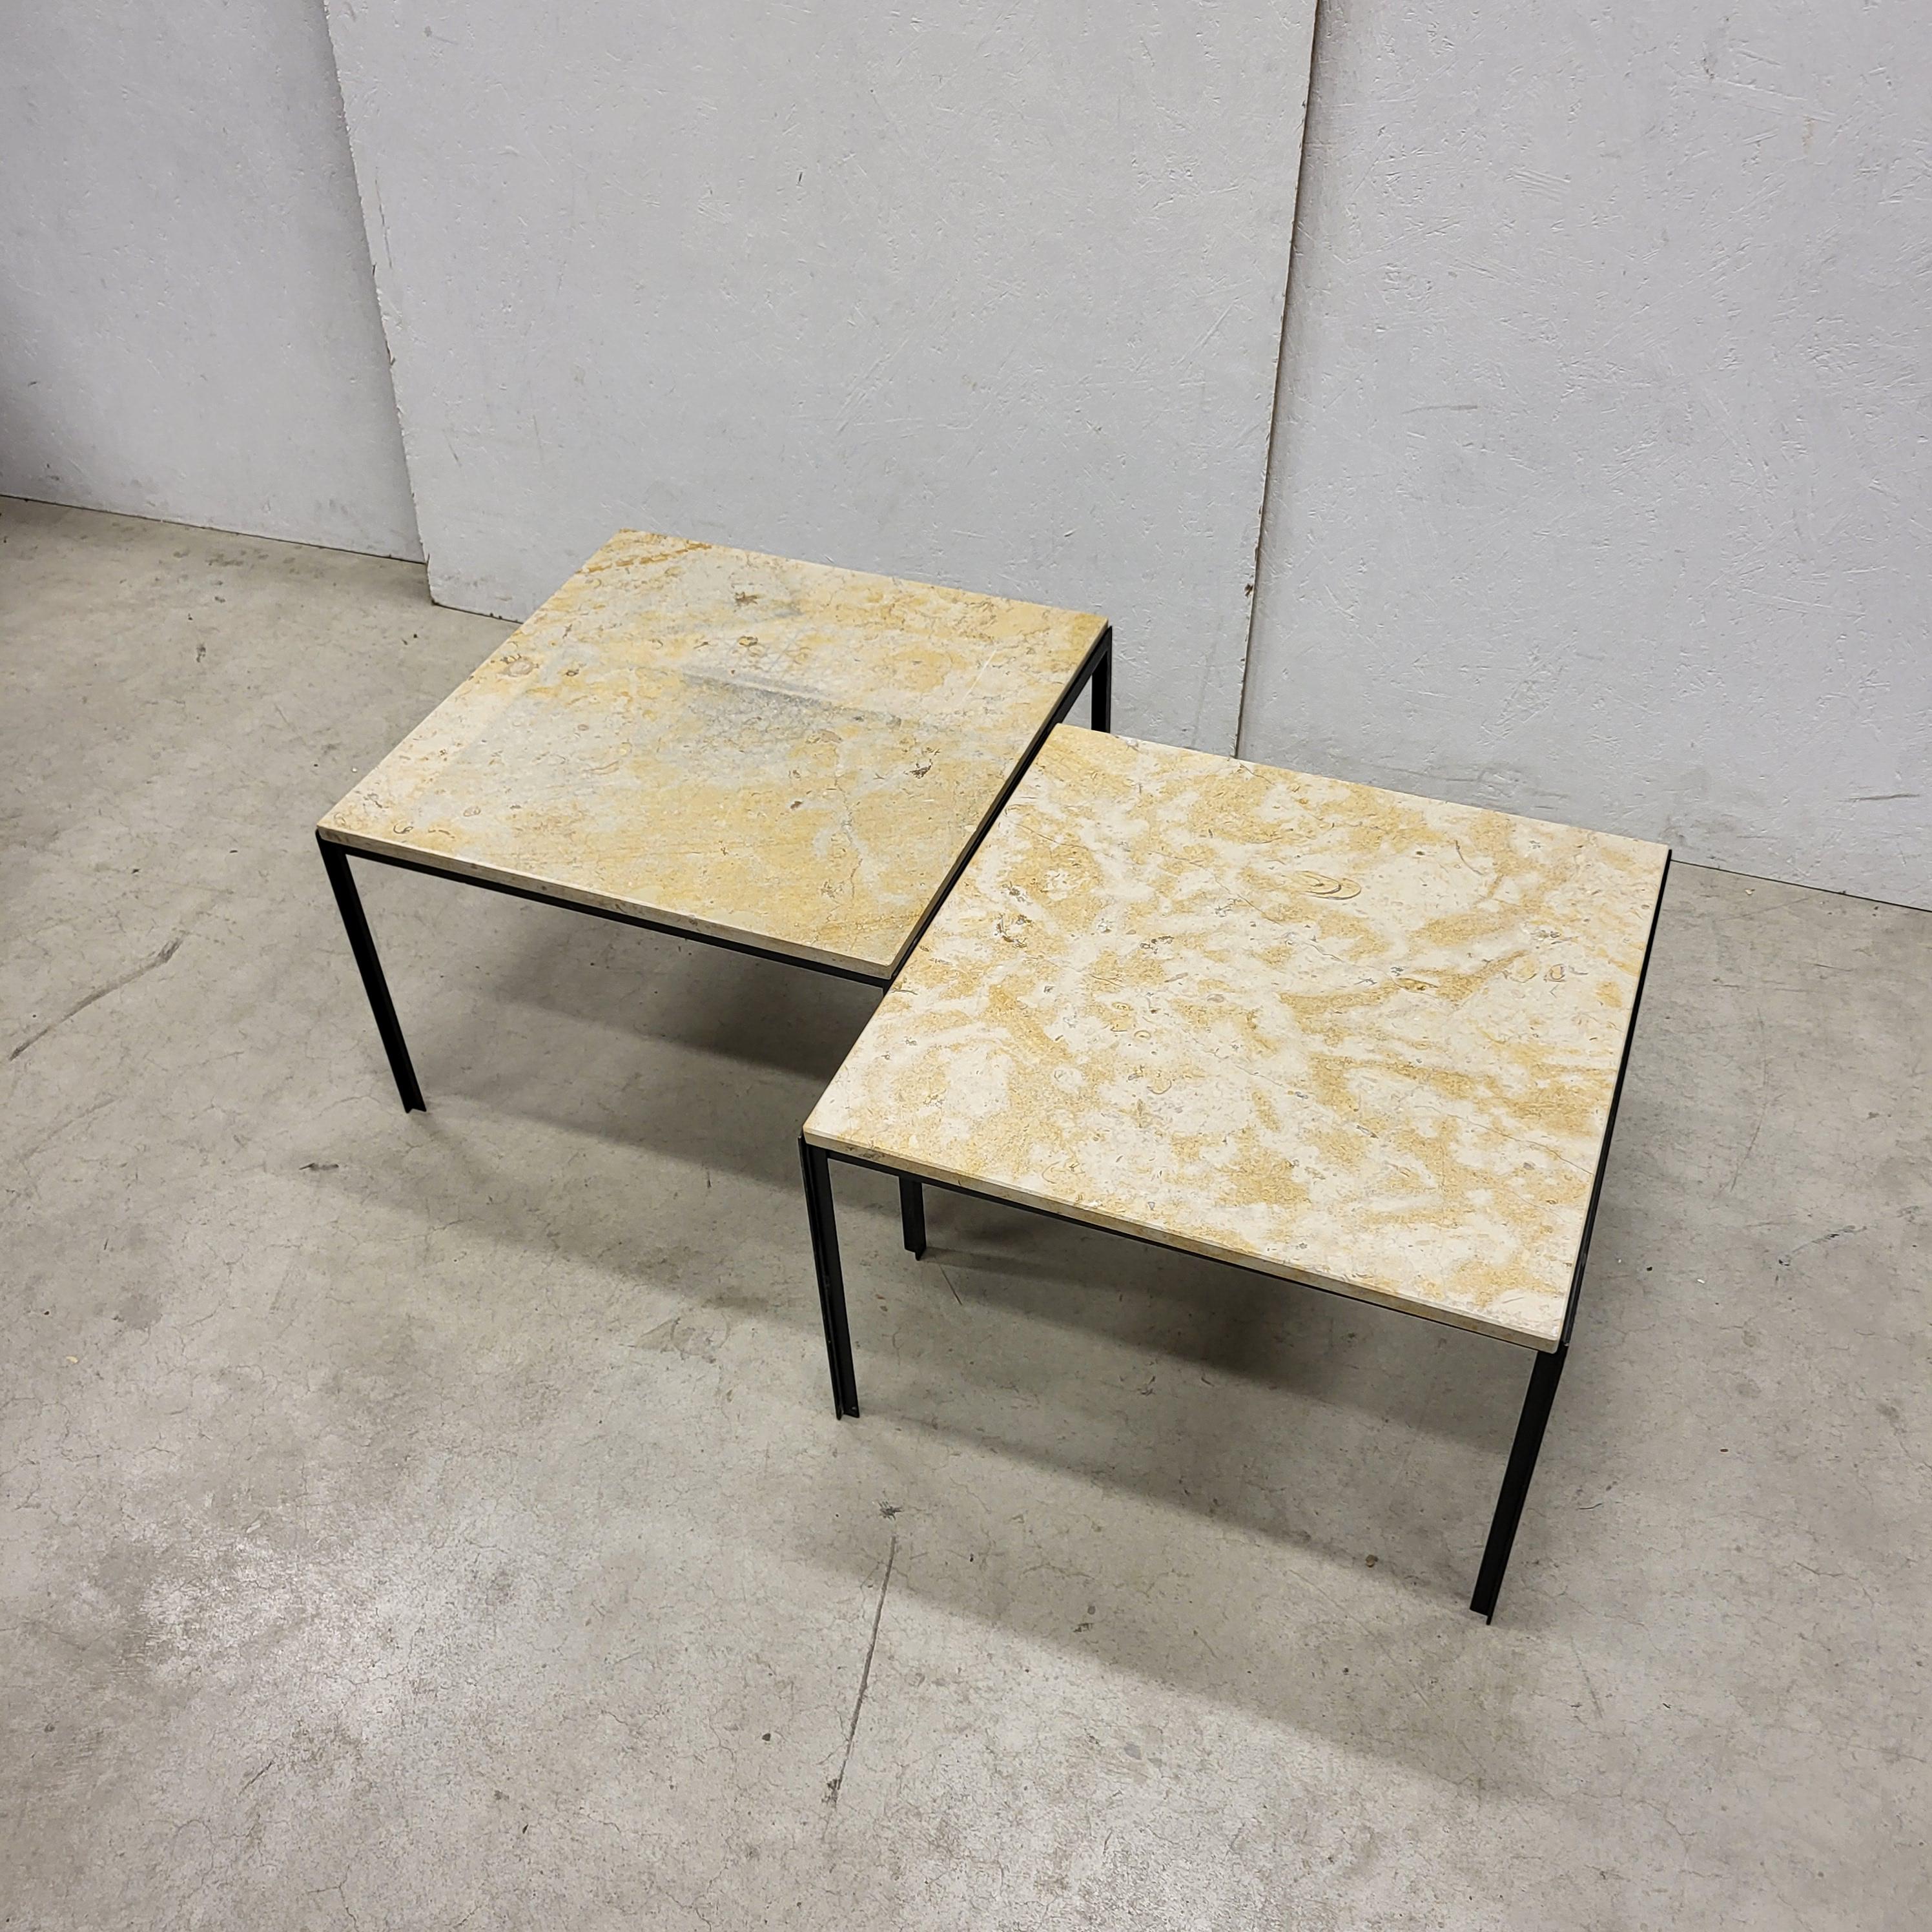 Fine and very nice Travertin coffee tables by Florence Knoll for Knoll Inc.
The tables were made in the mid 60s.

The travertin has an amazing structure and these examples comes in a very good condition.
The travertin hasn´t any chips or